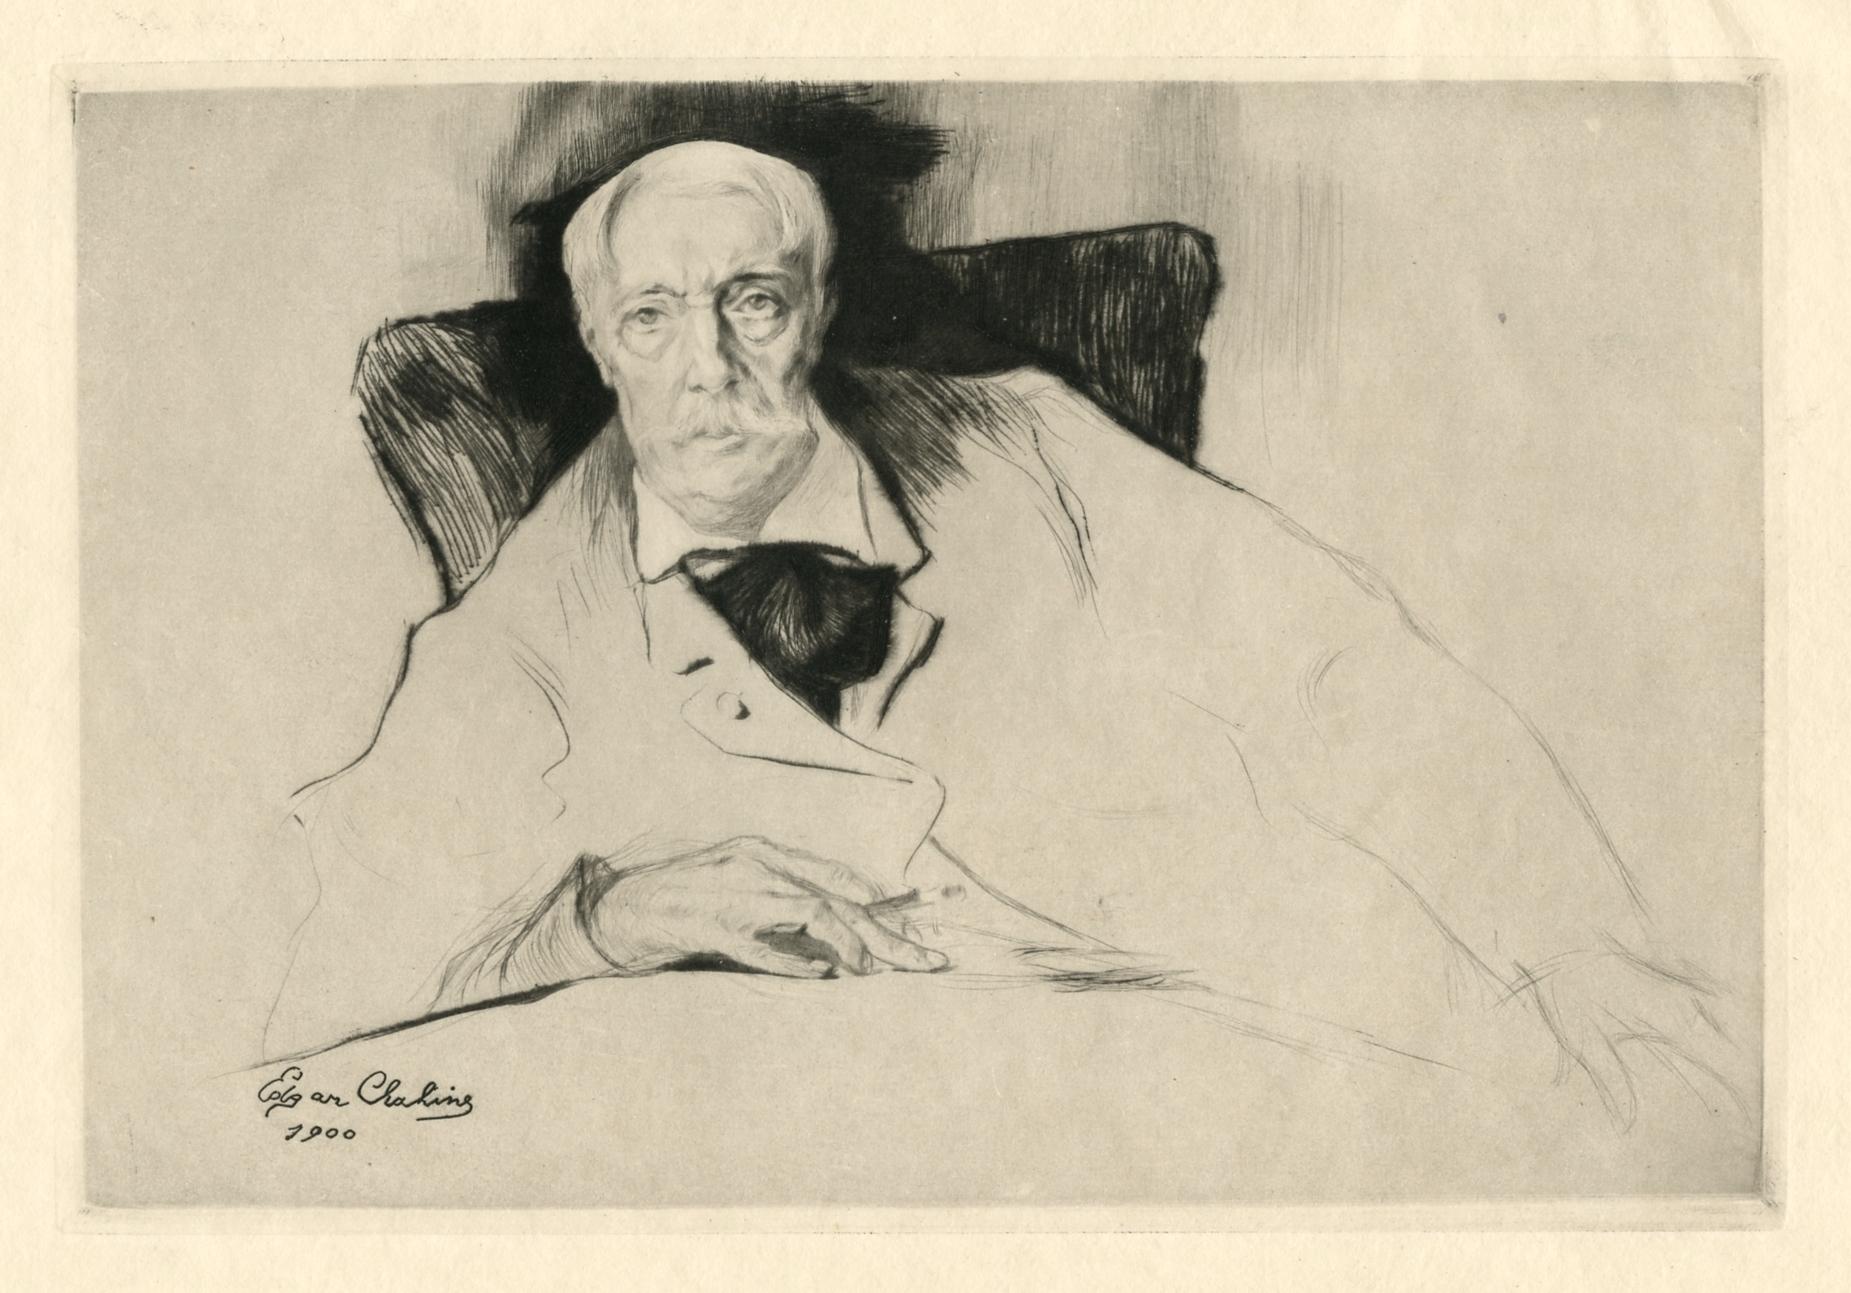 Edgar Chahine Portrait Print - "Alfred Stevens" original etching and drypoint on japon paper